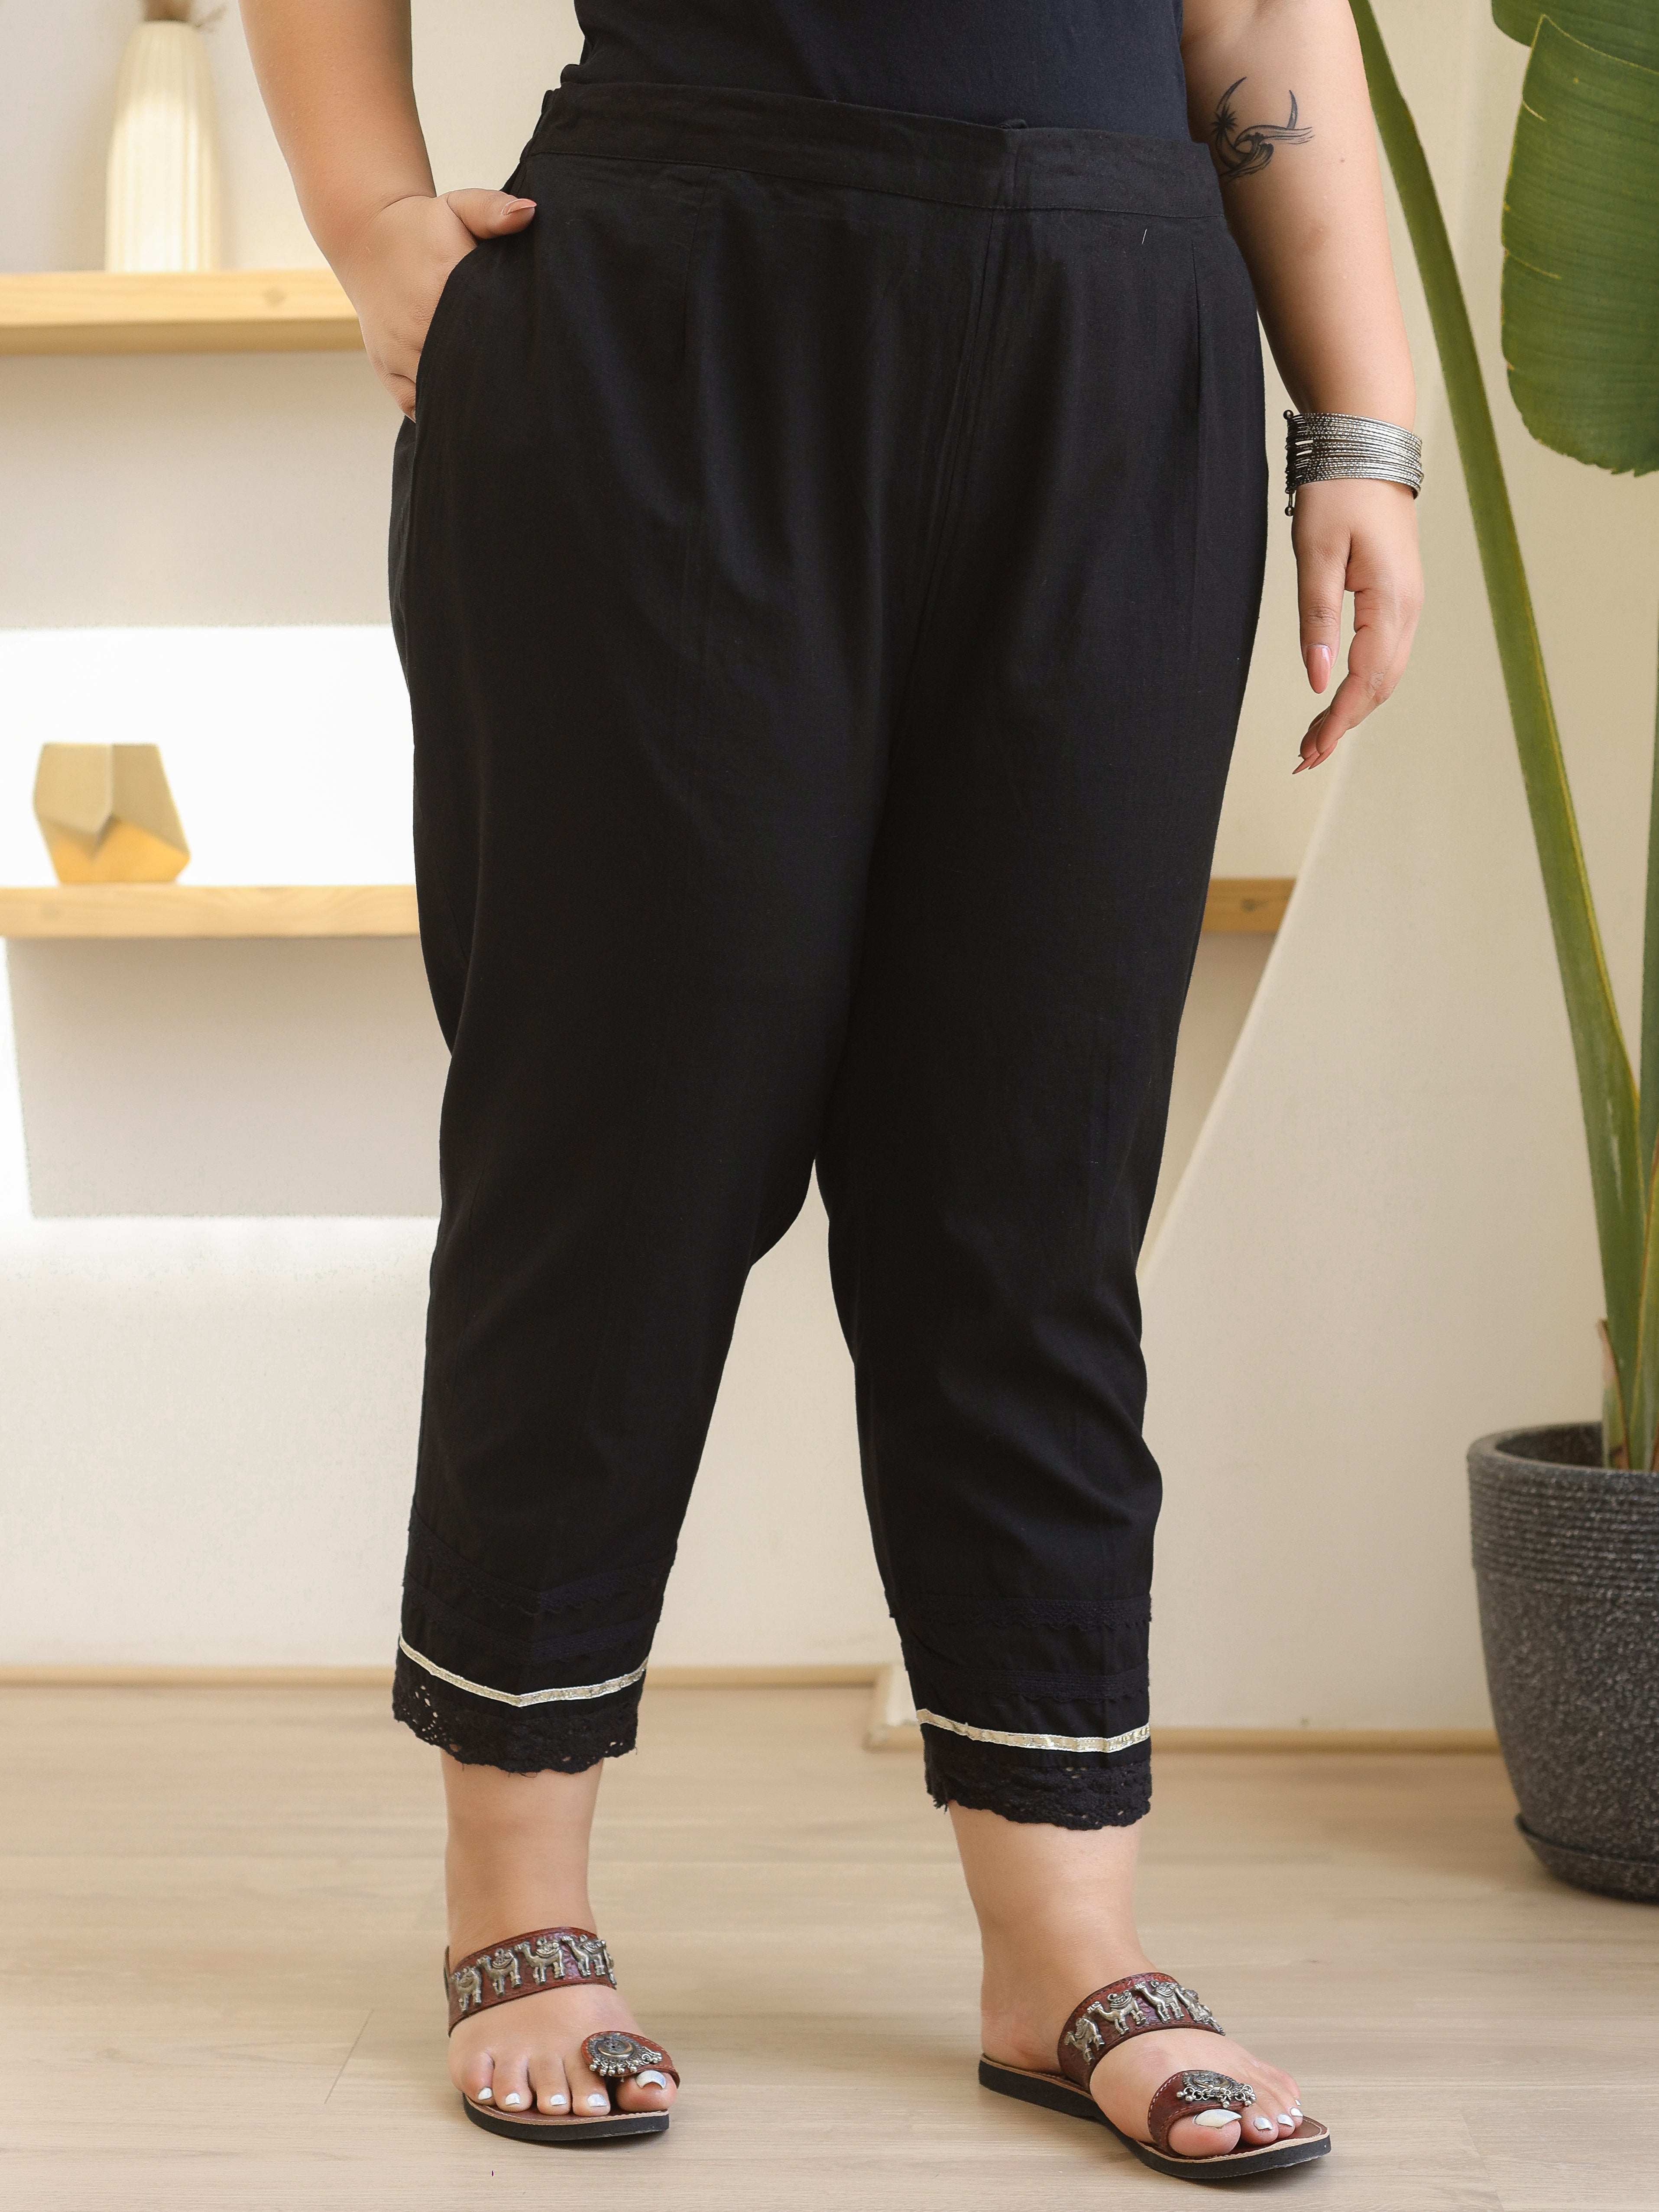 Juniper Black Solid  Cotton Women Slim Fit Laced Plus Size Pants With Single Side Pocket & Drawstring